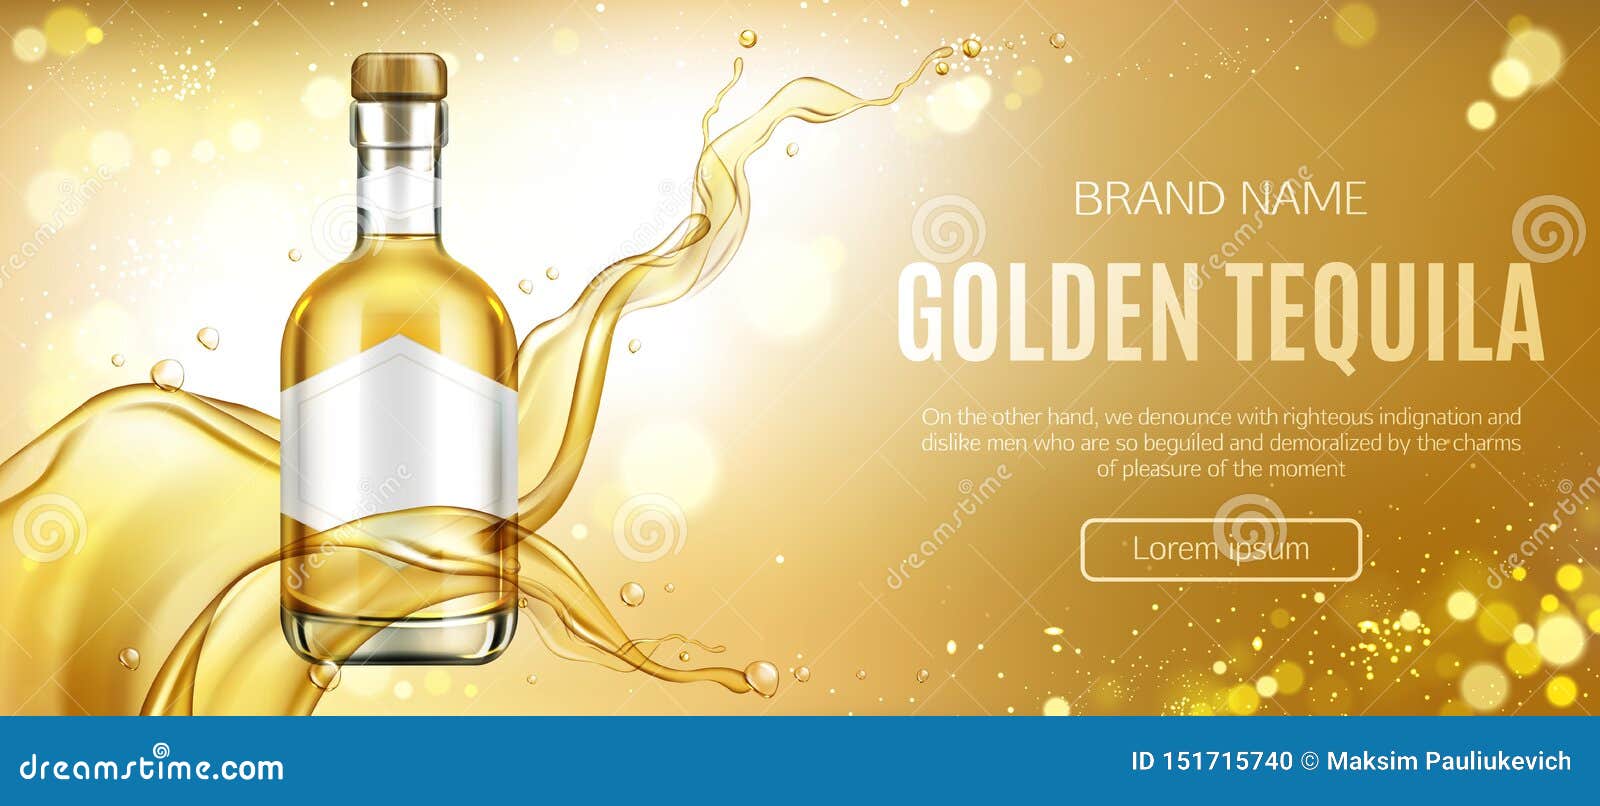 Download Golden Tequila Bottle Mock Up Advertising Banner Stock Vector Illustration Of Party Label 151715740 Yellowimages Mockups